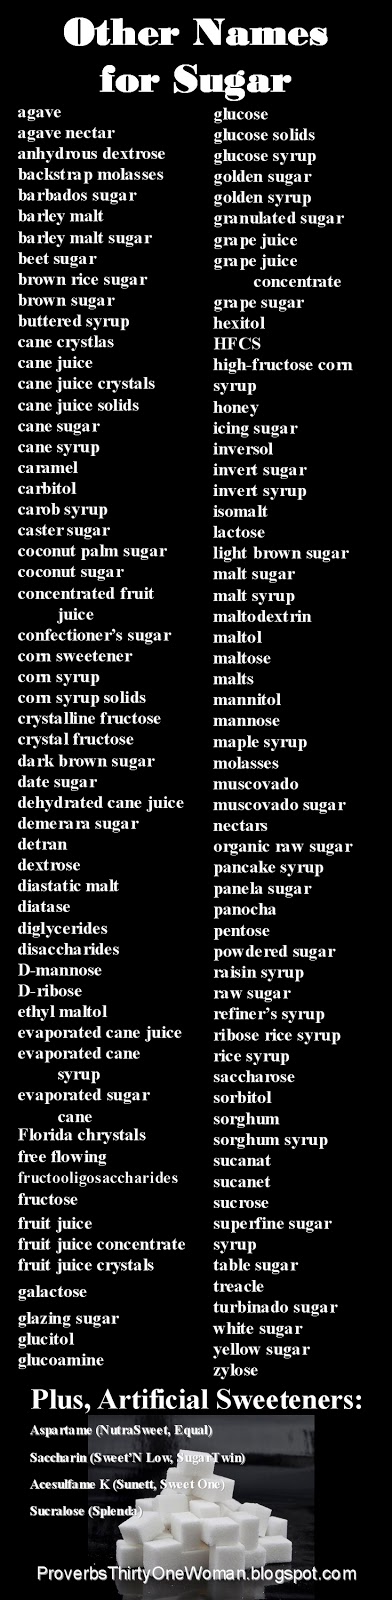 Spotting Sugar's Sneaky Names - with a FREE Printable List to Take ...